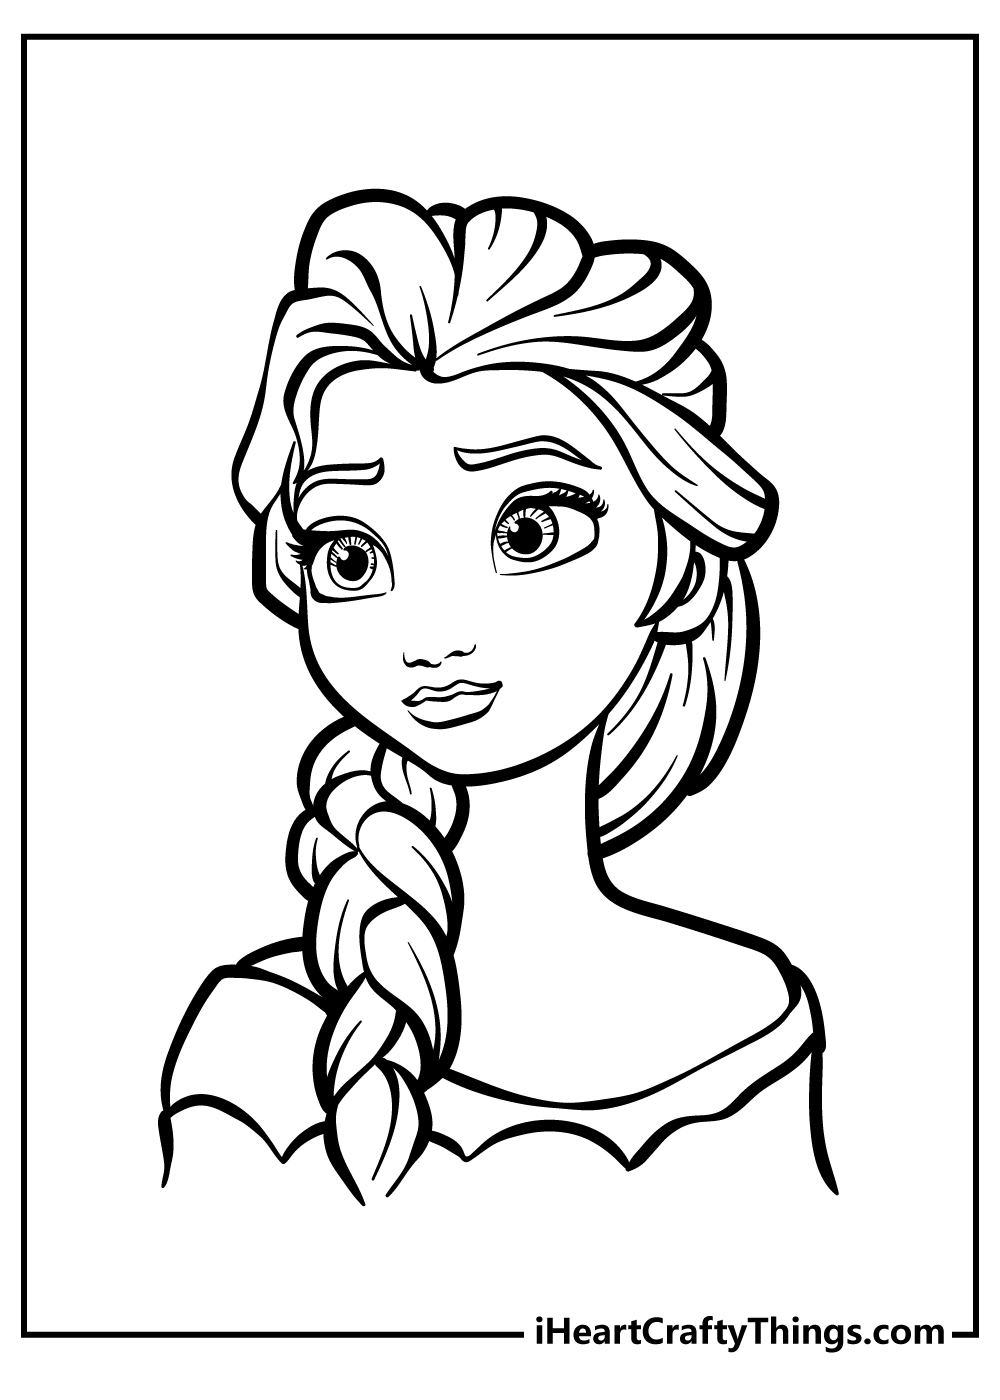 Elsa coloring pages free printables